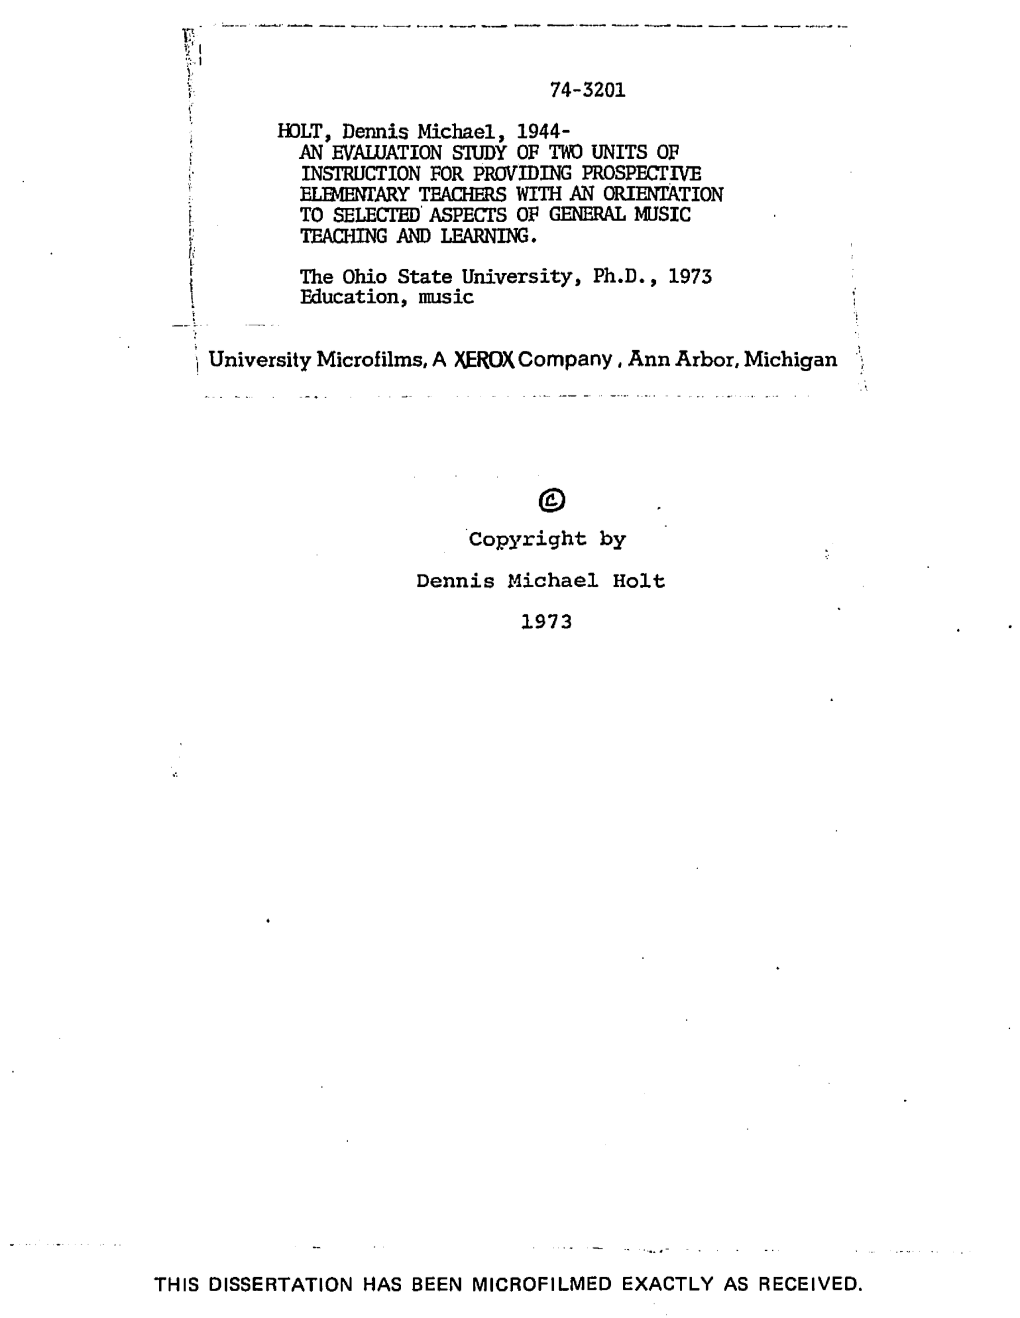 The Ohio State University, Ph.D., 1973 Education, Music Copyright By